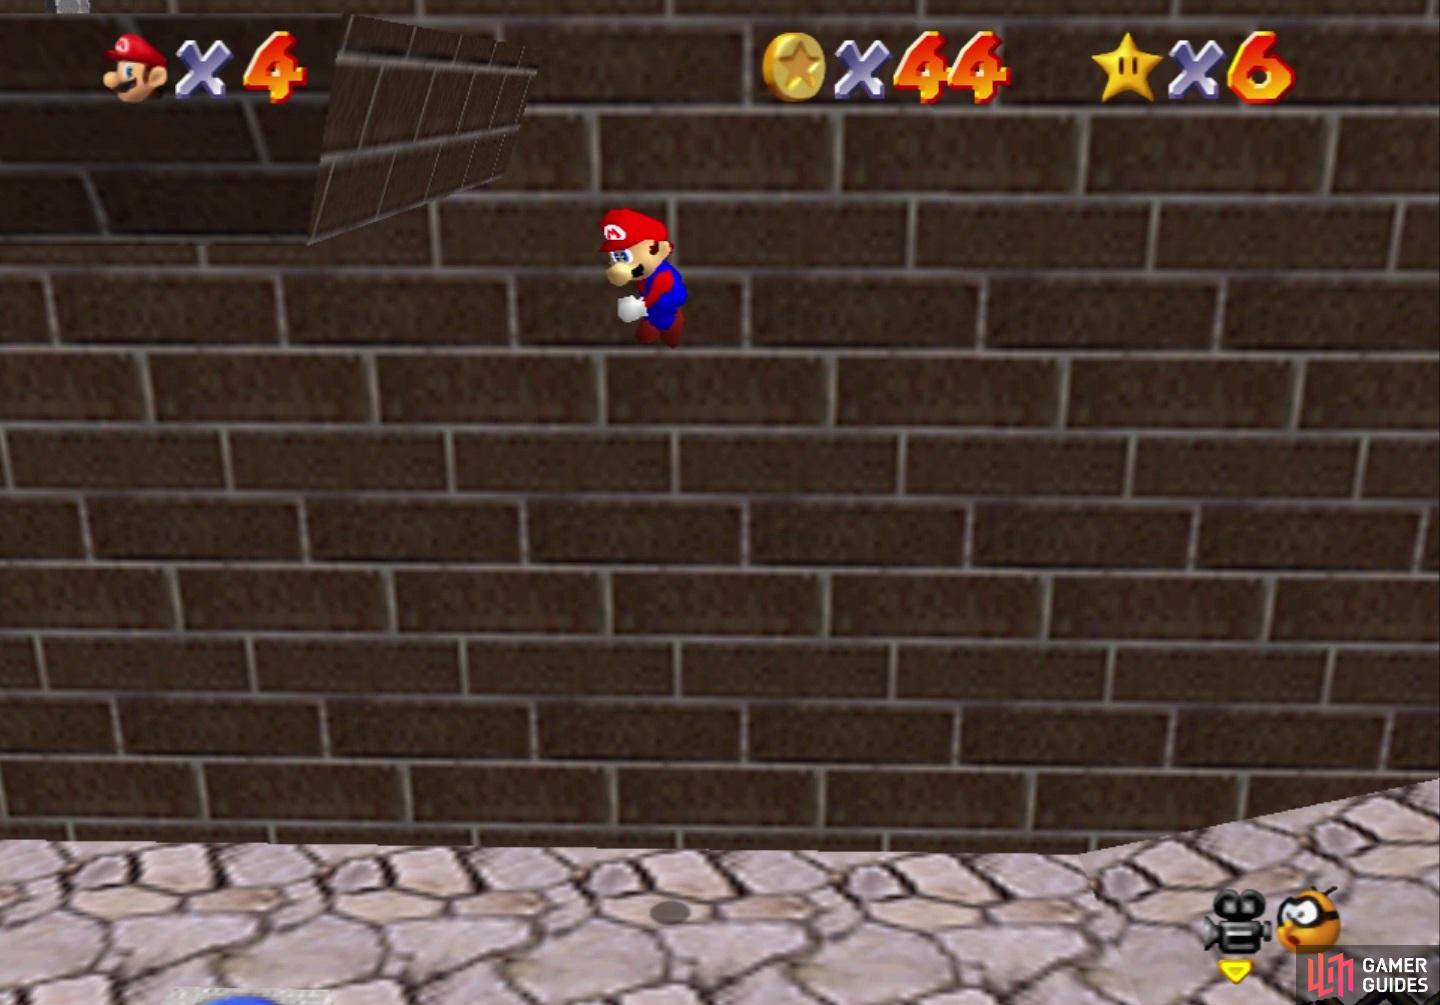 Wall jumping up to the ledge with the star is pretty easy to do